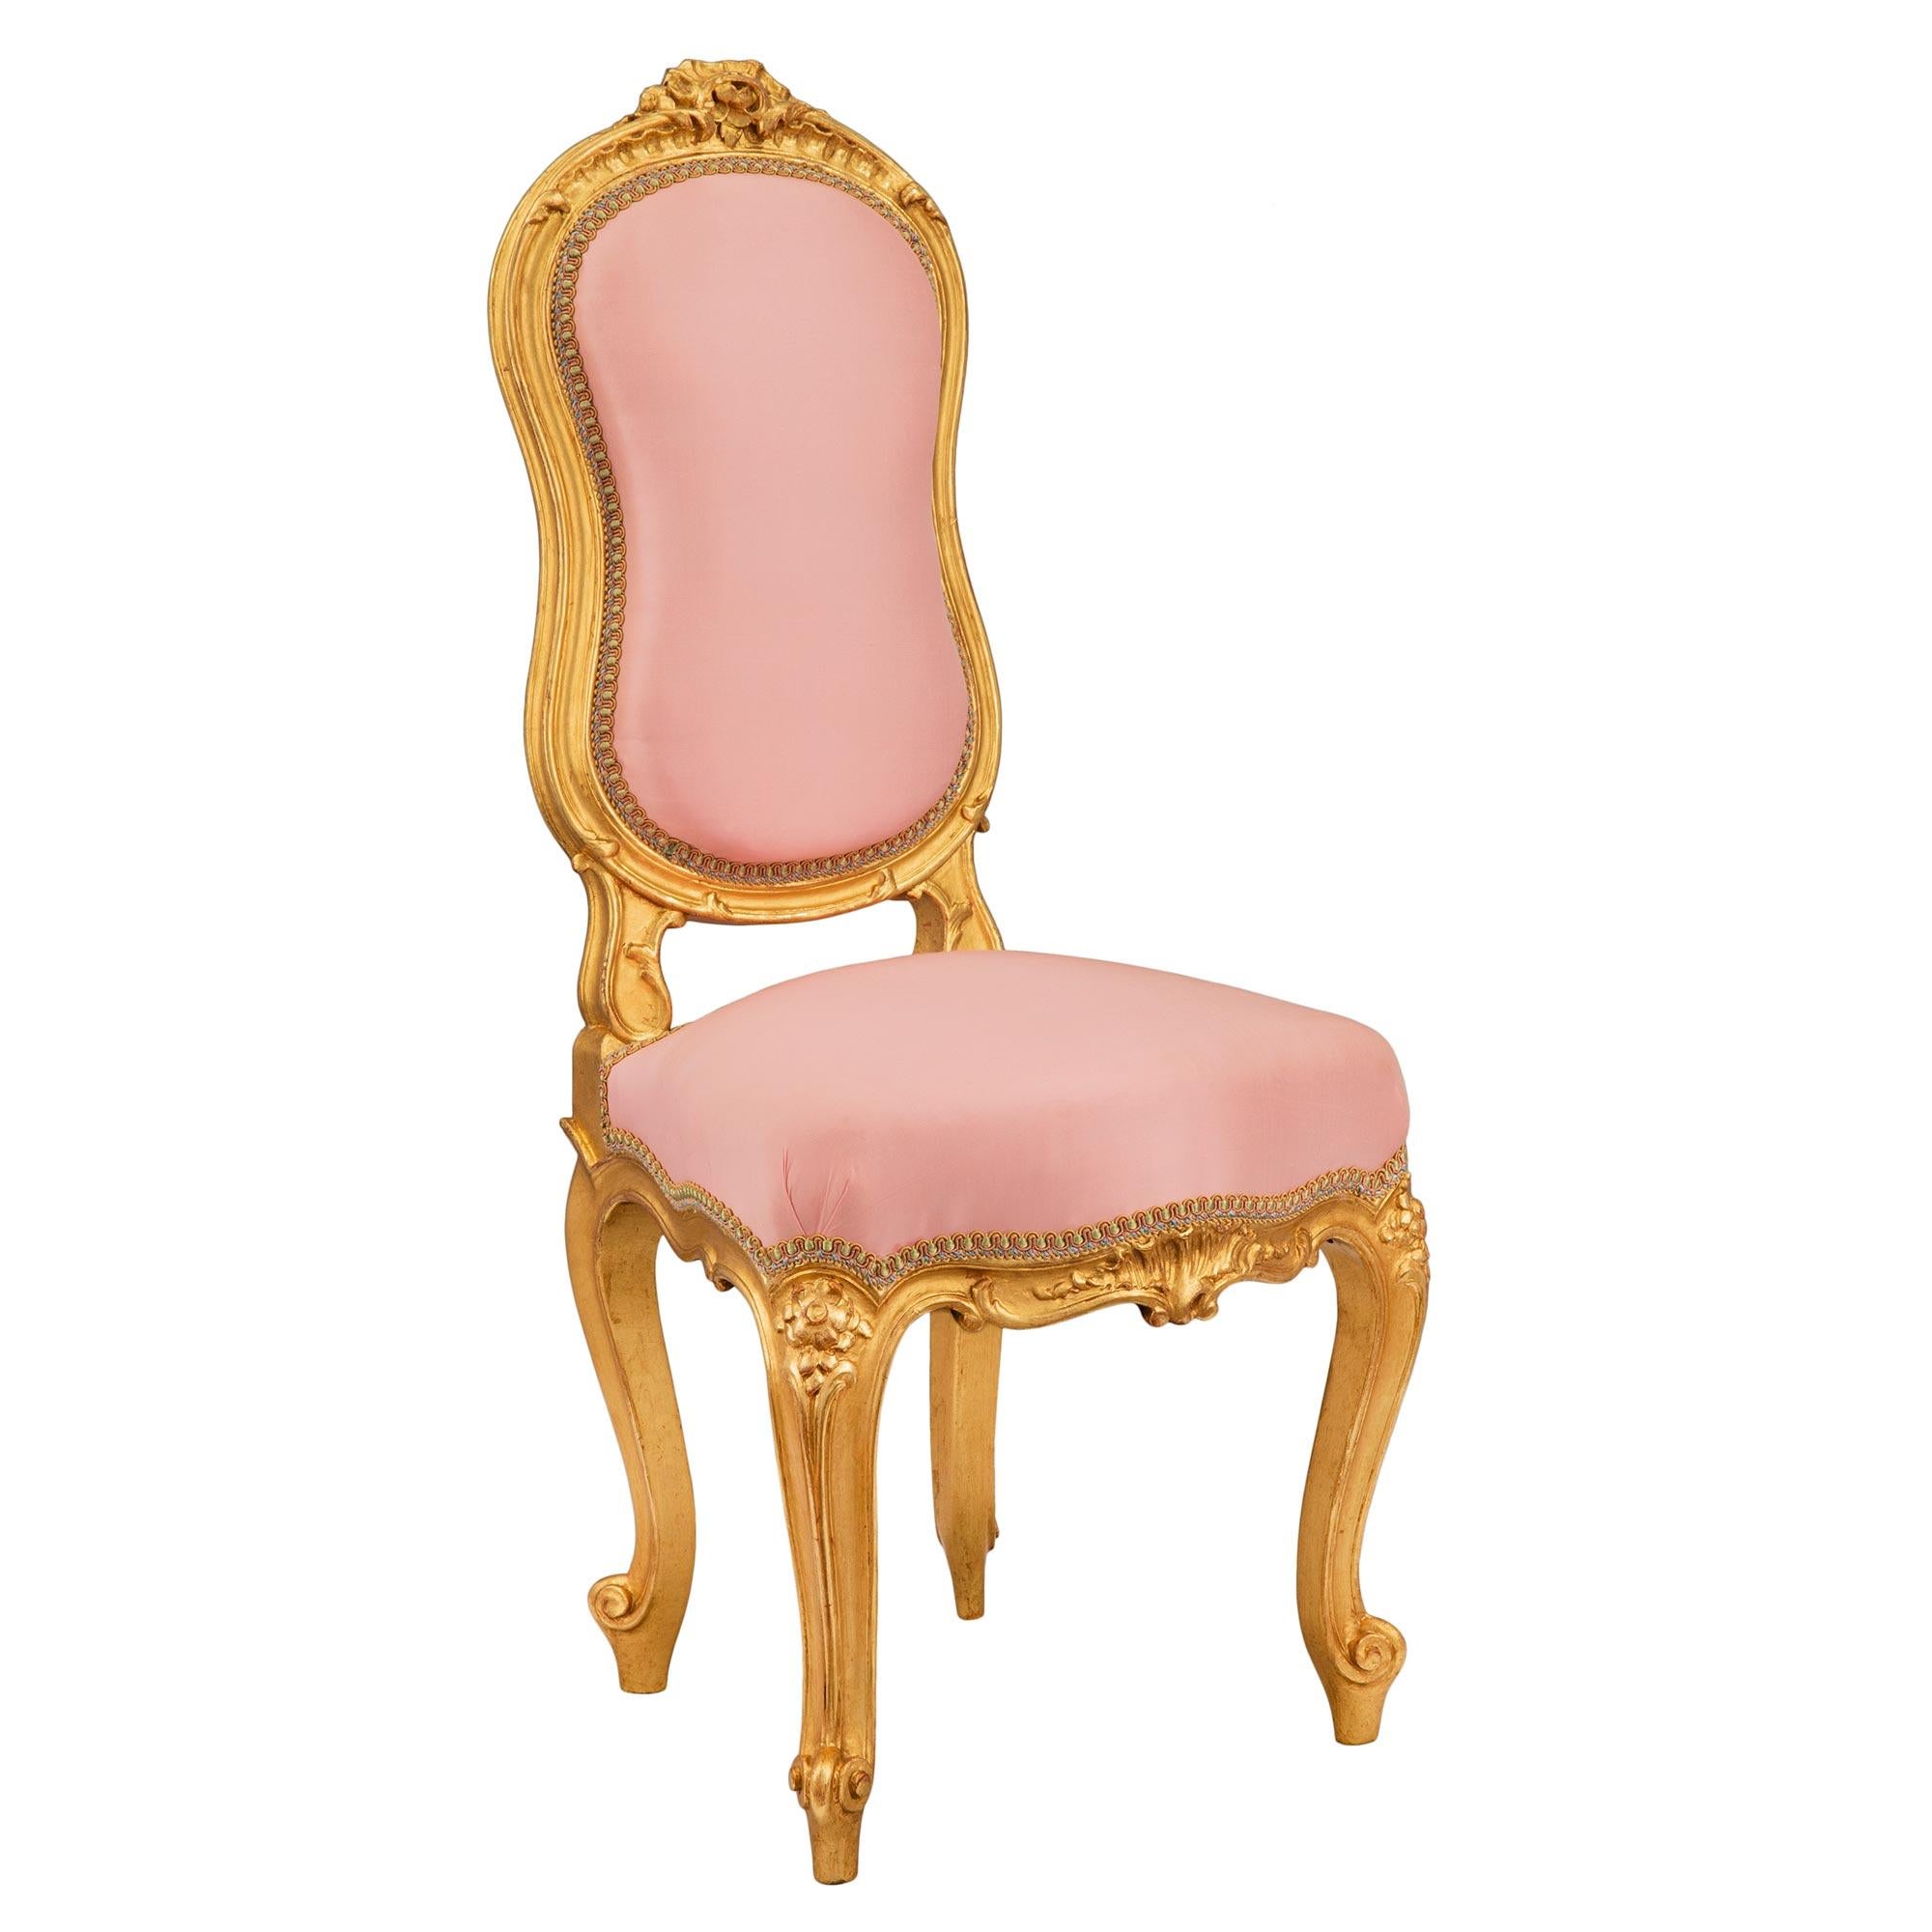 A very charming French 19th century Louis XV st. child's chair. The chair is raised by fine cabriole legs with elegant scrolled feet. Above each leg is a lovely foliate carving, centered by an arbalest shaped frieze, with a striking carved seashell